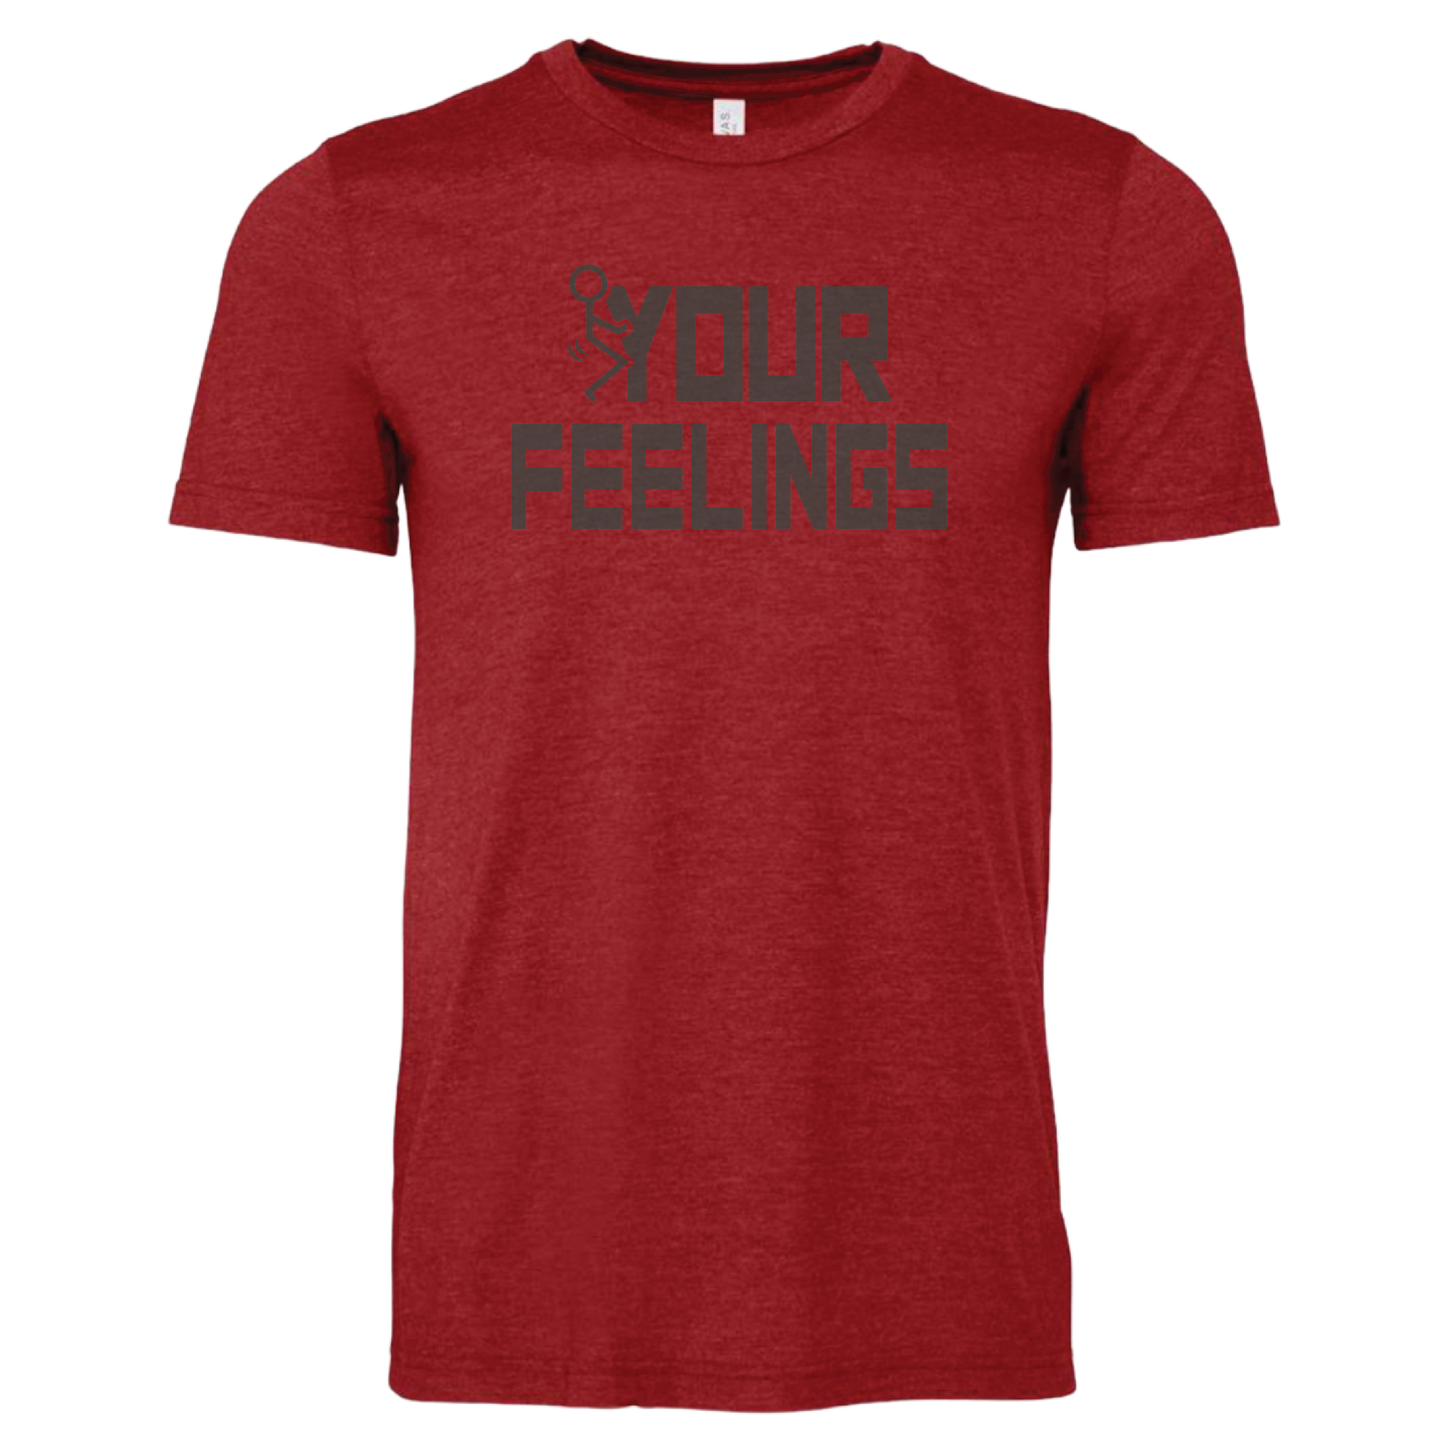 Feelings - Available in Multiple Colors & Styles